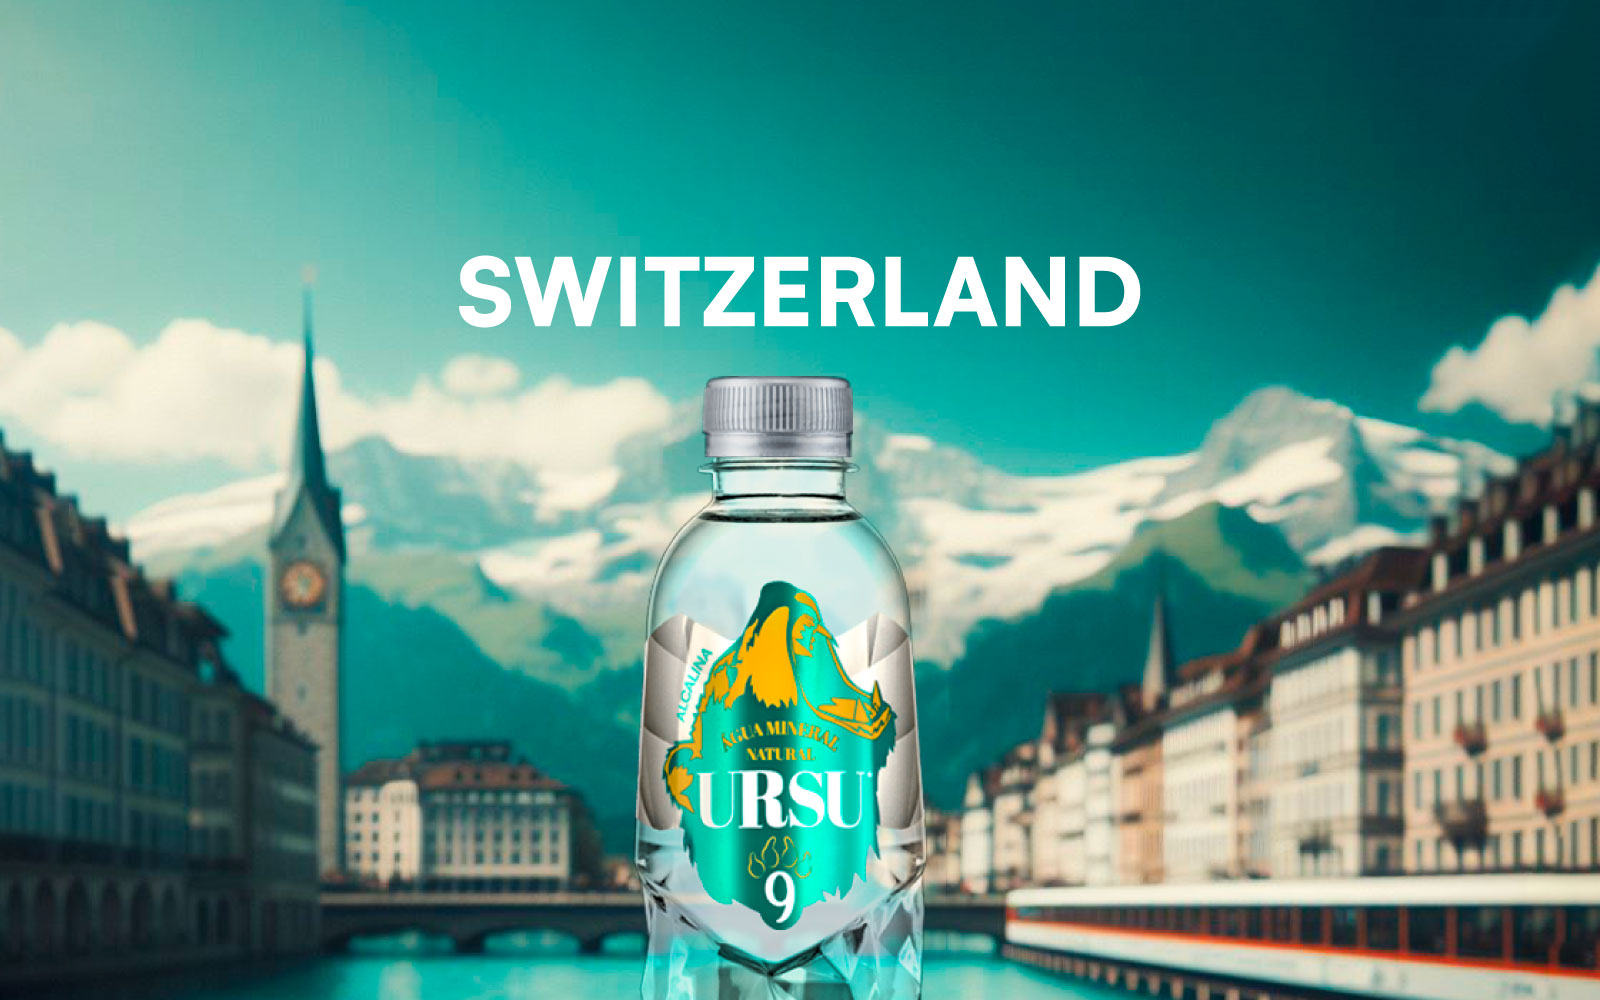 Ursu has just expanded its international presence with its arrival in the Swiss market